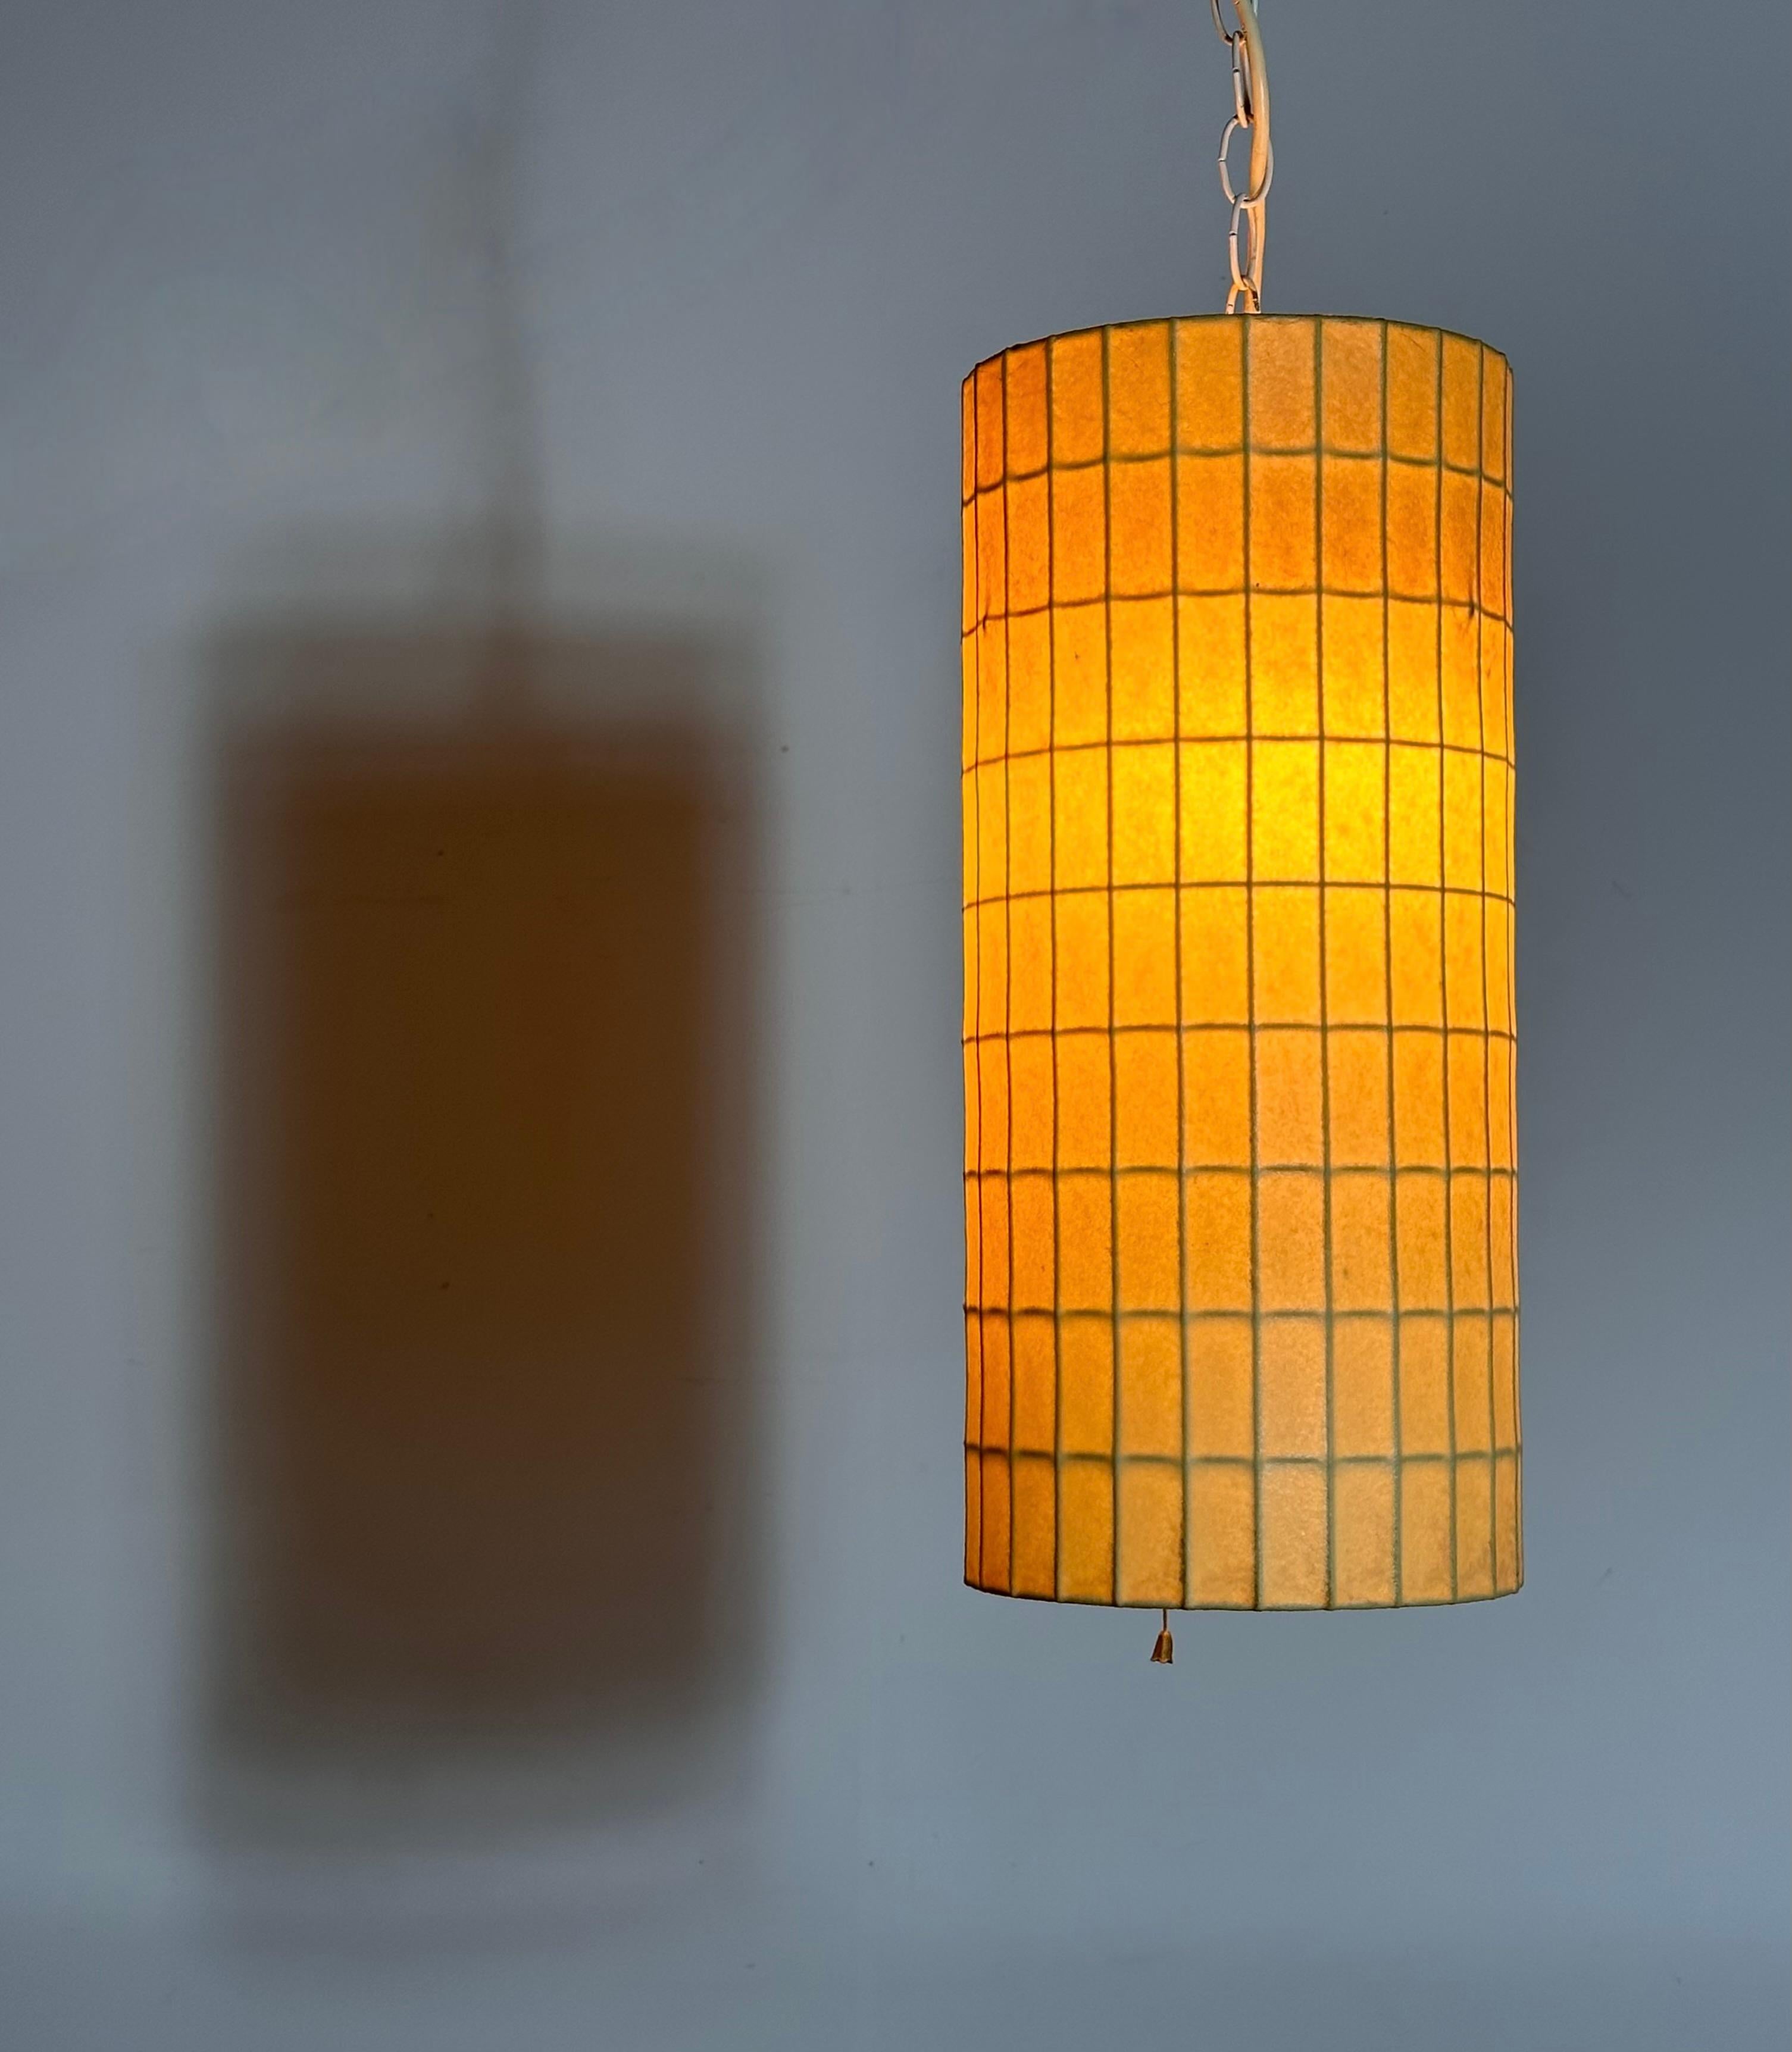 Original Vintage George Nelson Cylinder Bubble Pendant Lamp Howard Miller In Good Condition For Sale In Troy, MI